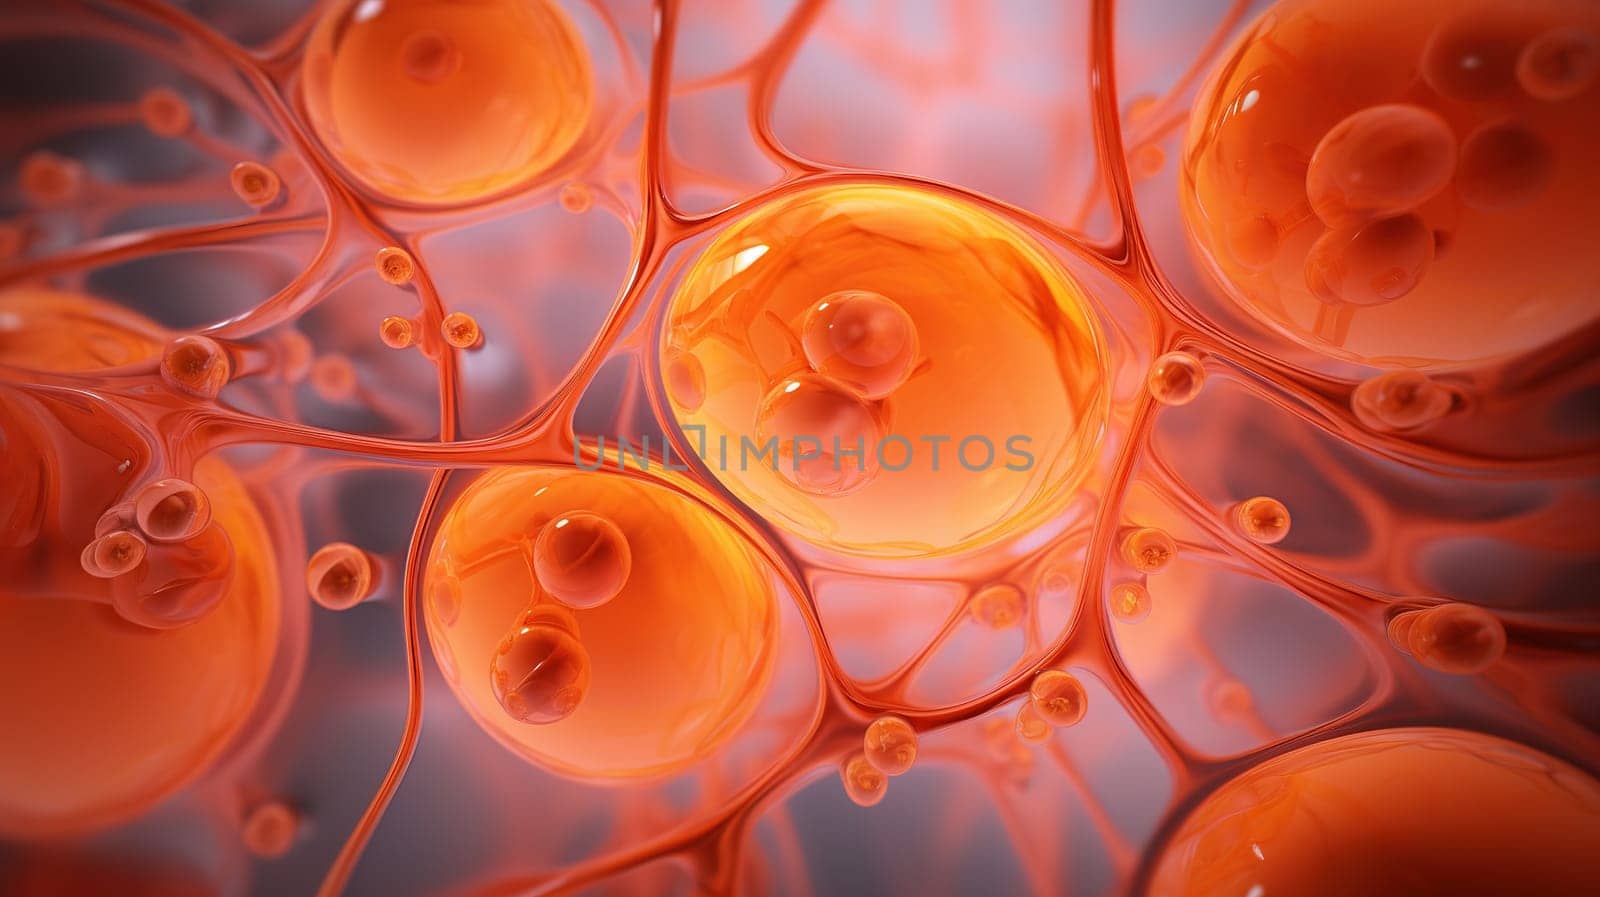 fat cells adipocytes under a microscope with an image of blood vessels, abstract molecular cellular structure by KaterinaDalemans